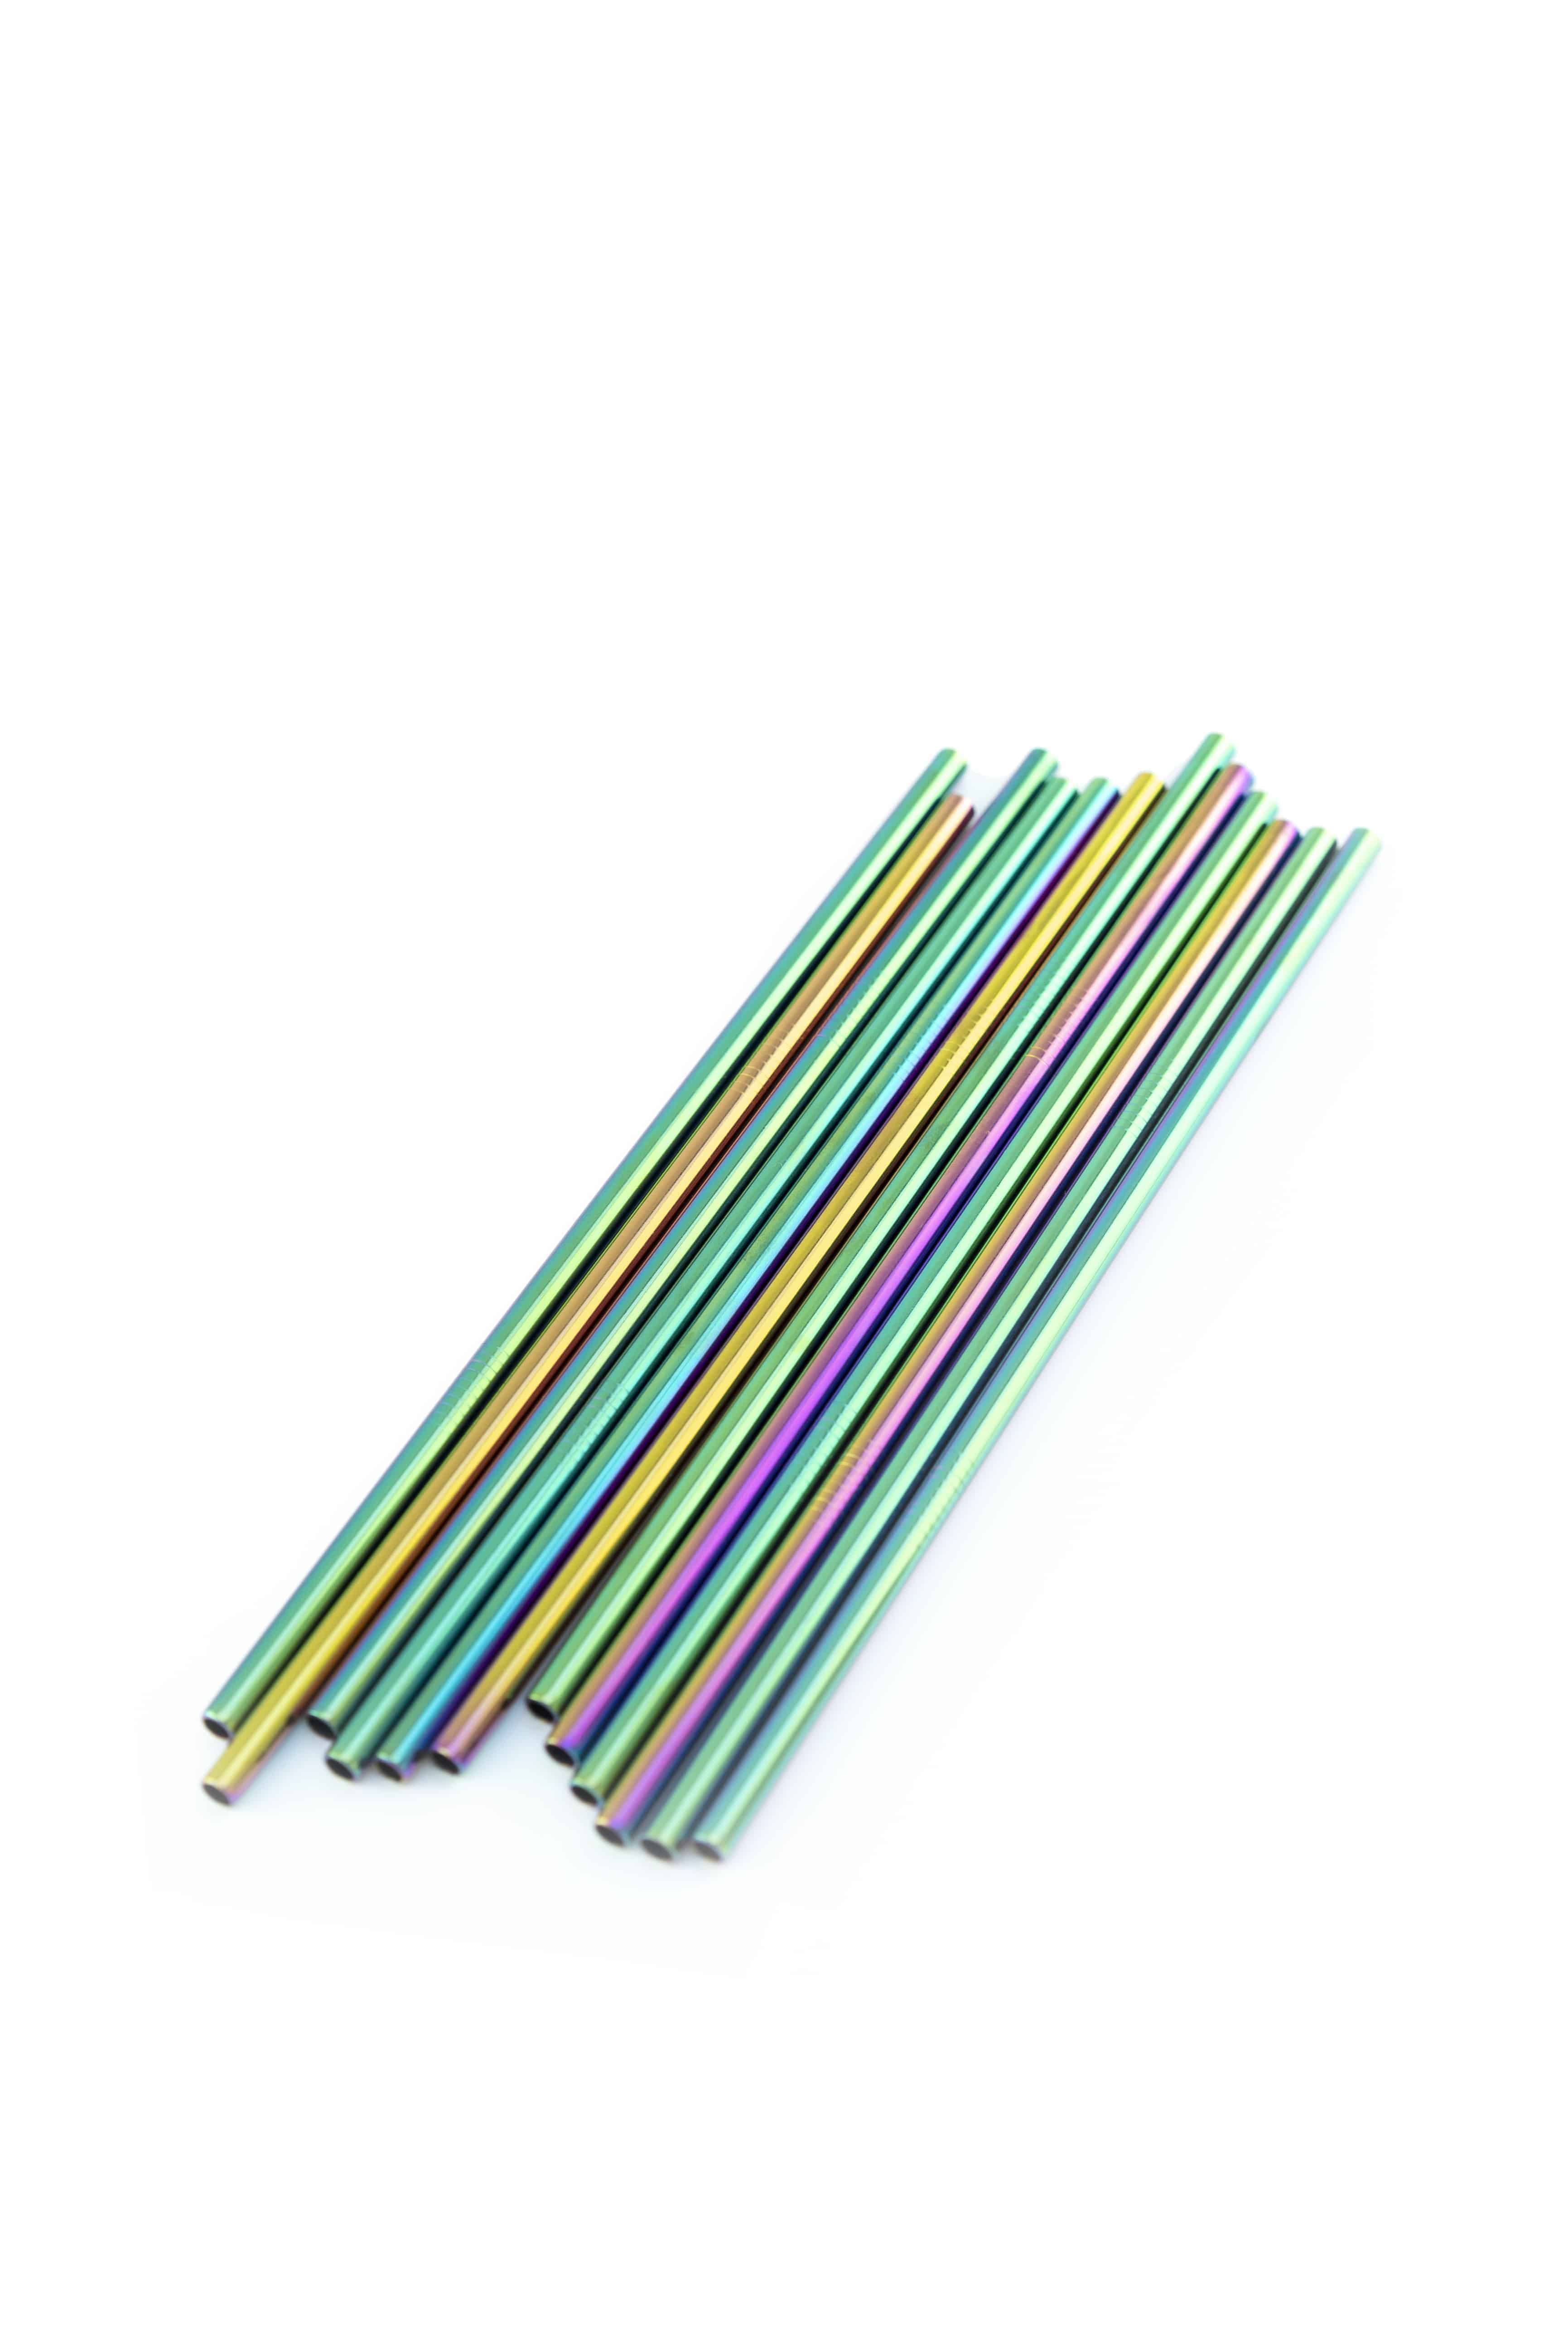 Reusable Stainless Steel Straw- Straight